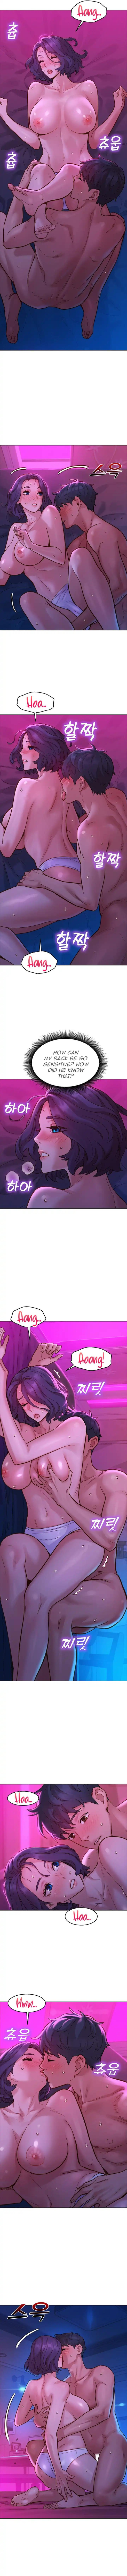 lets-hang-out-from-today-chap-27-5